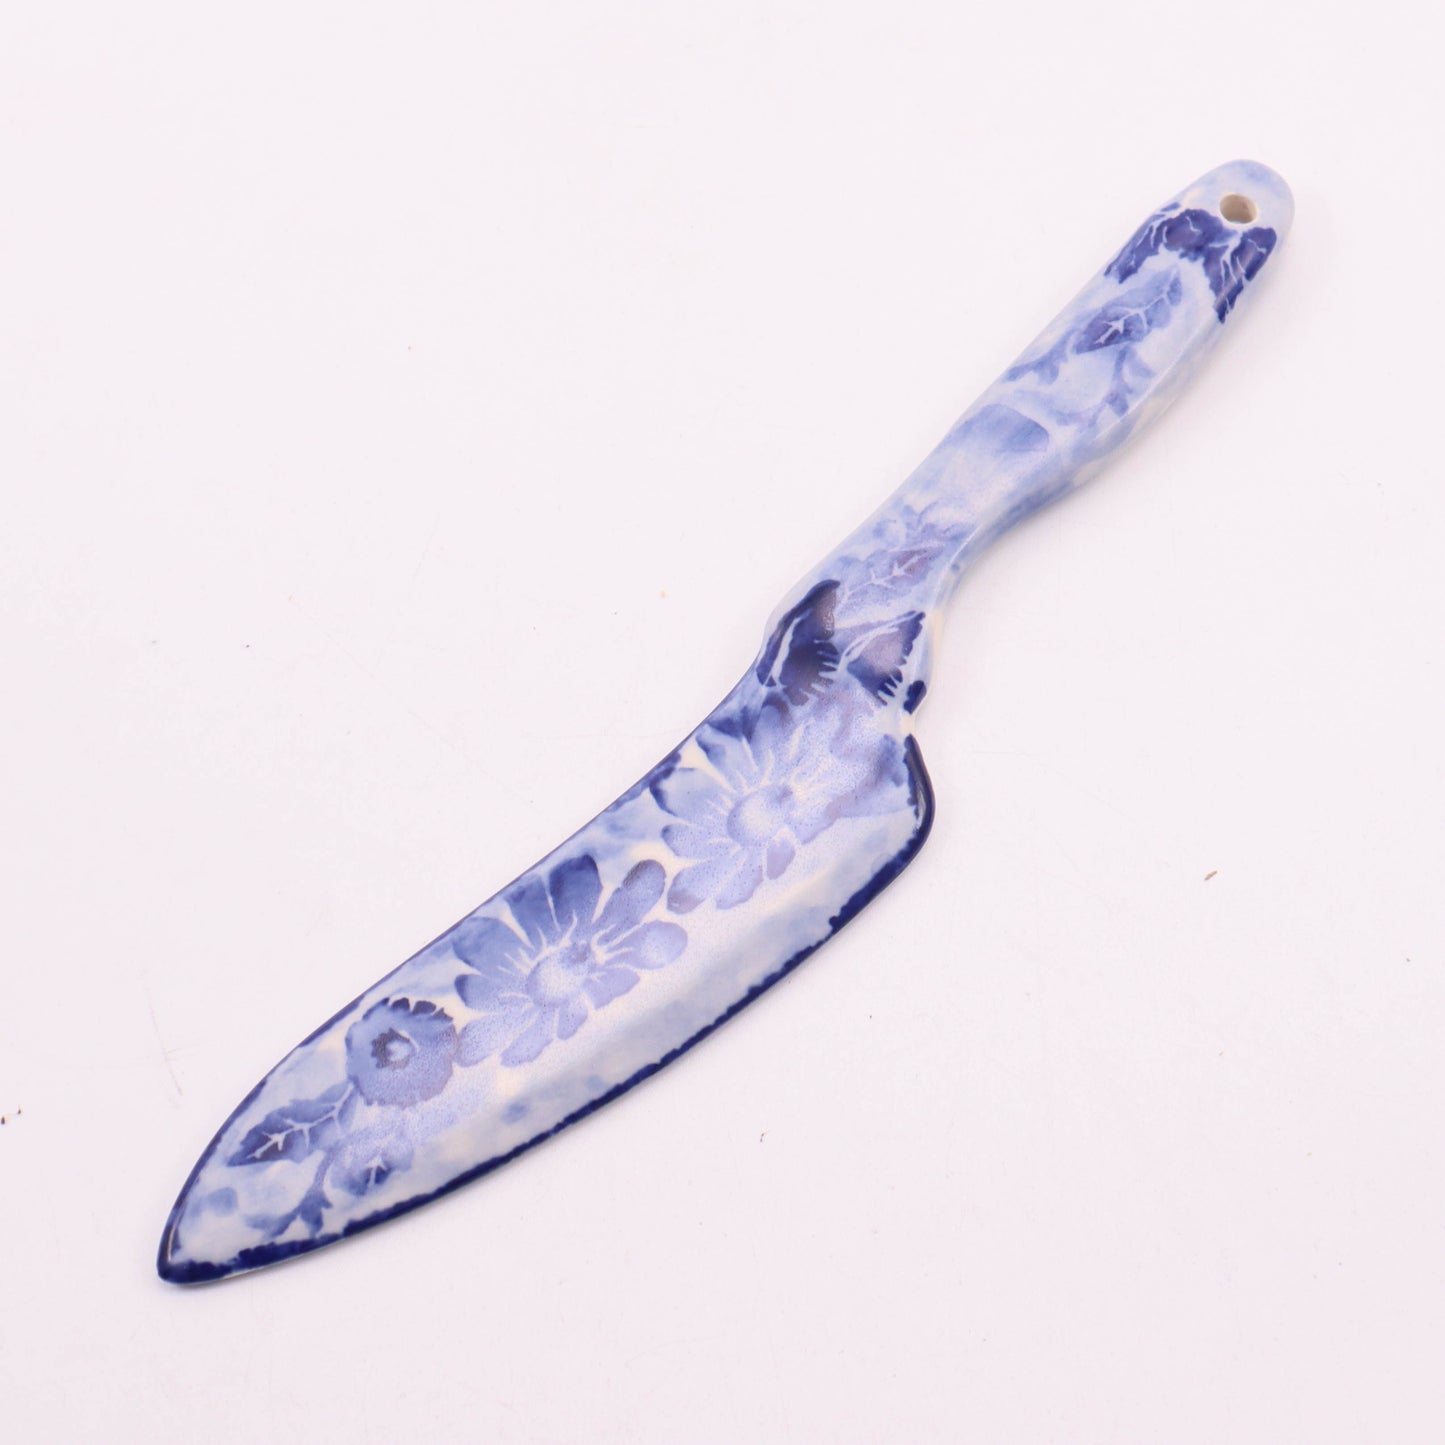 9" Spread Knife. Pattern: Watercolor Blossoms